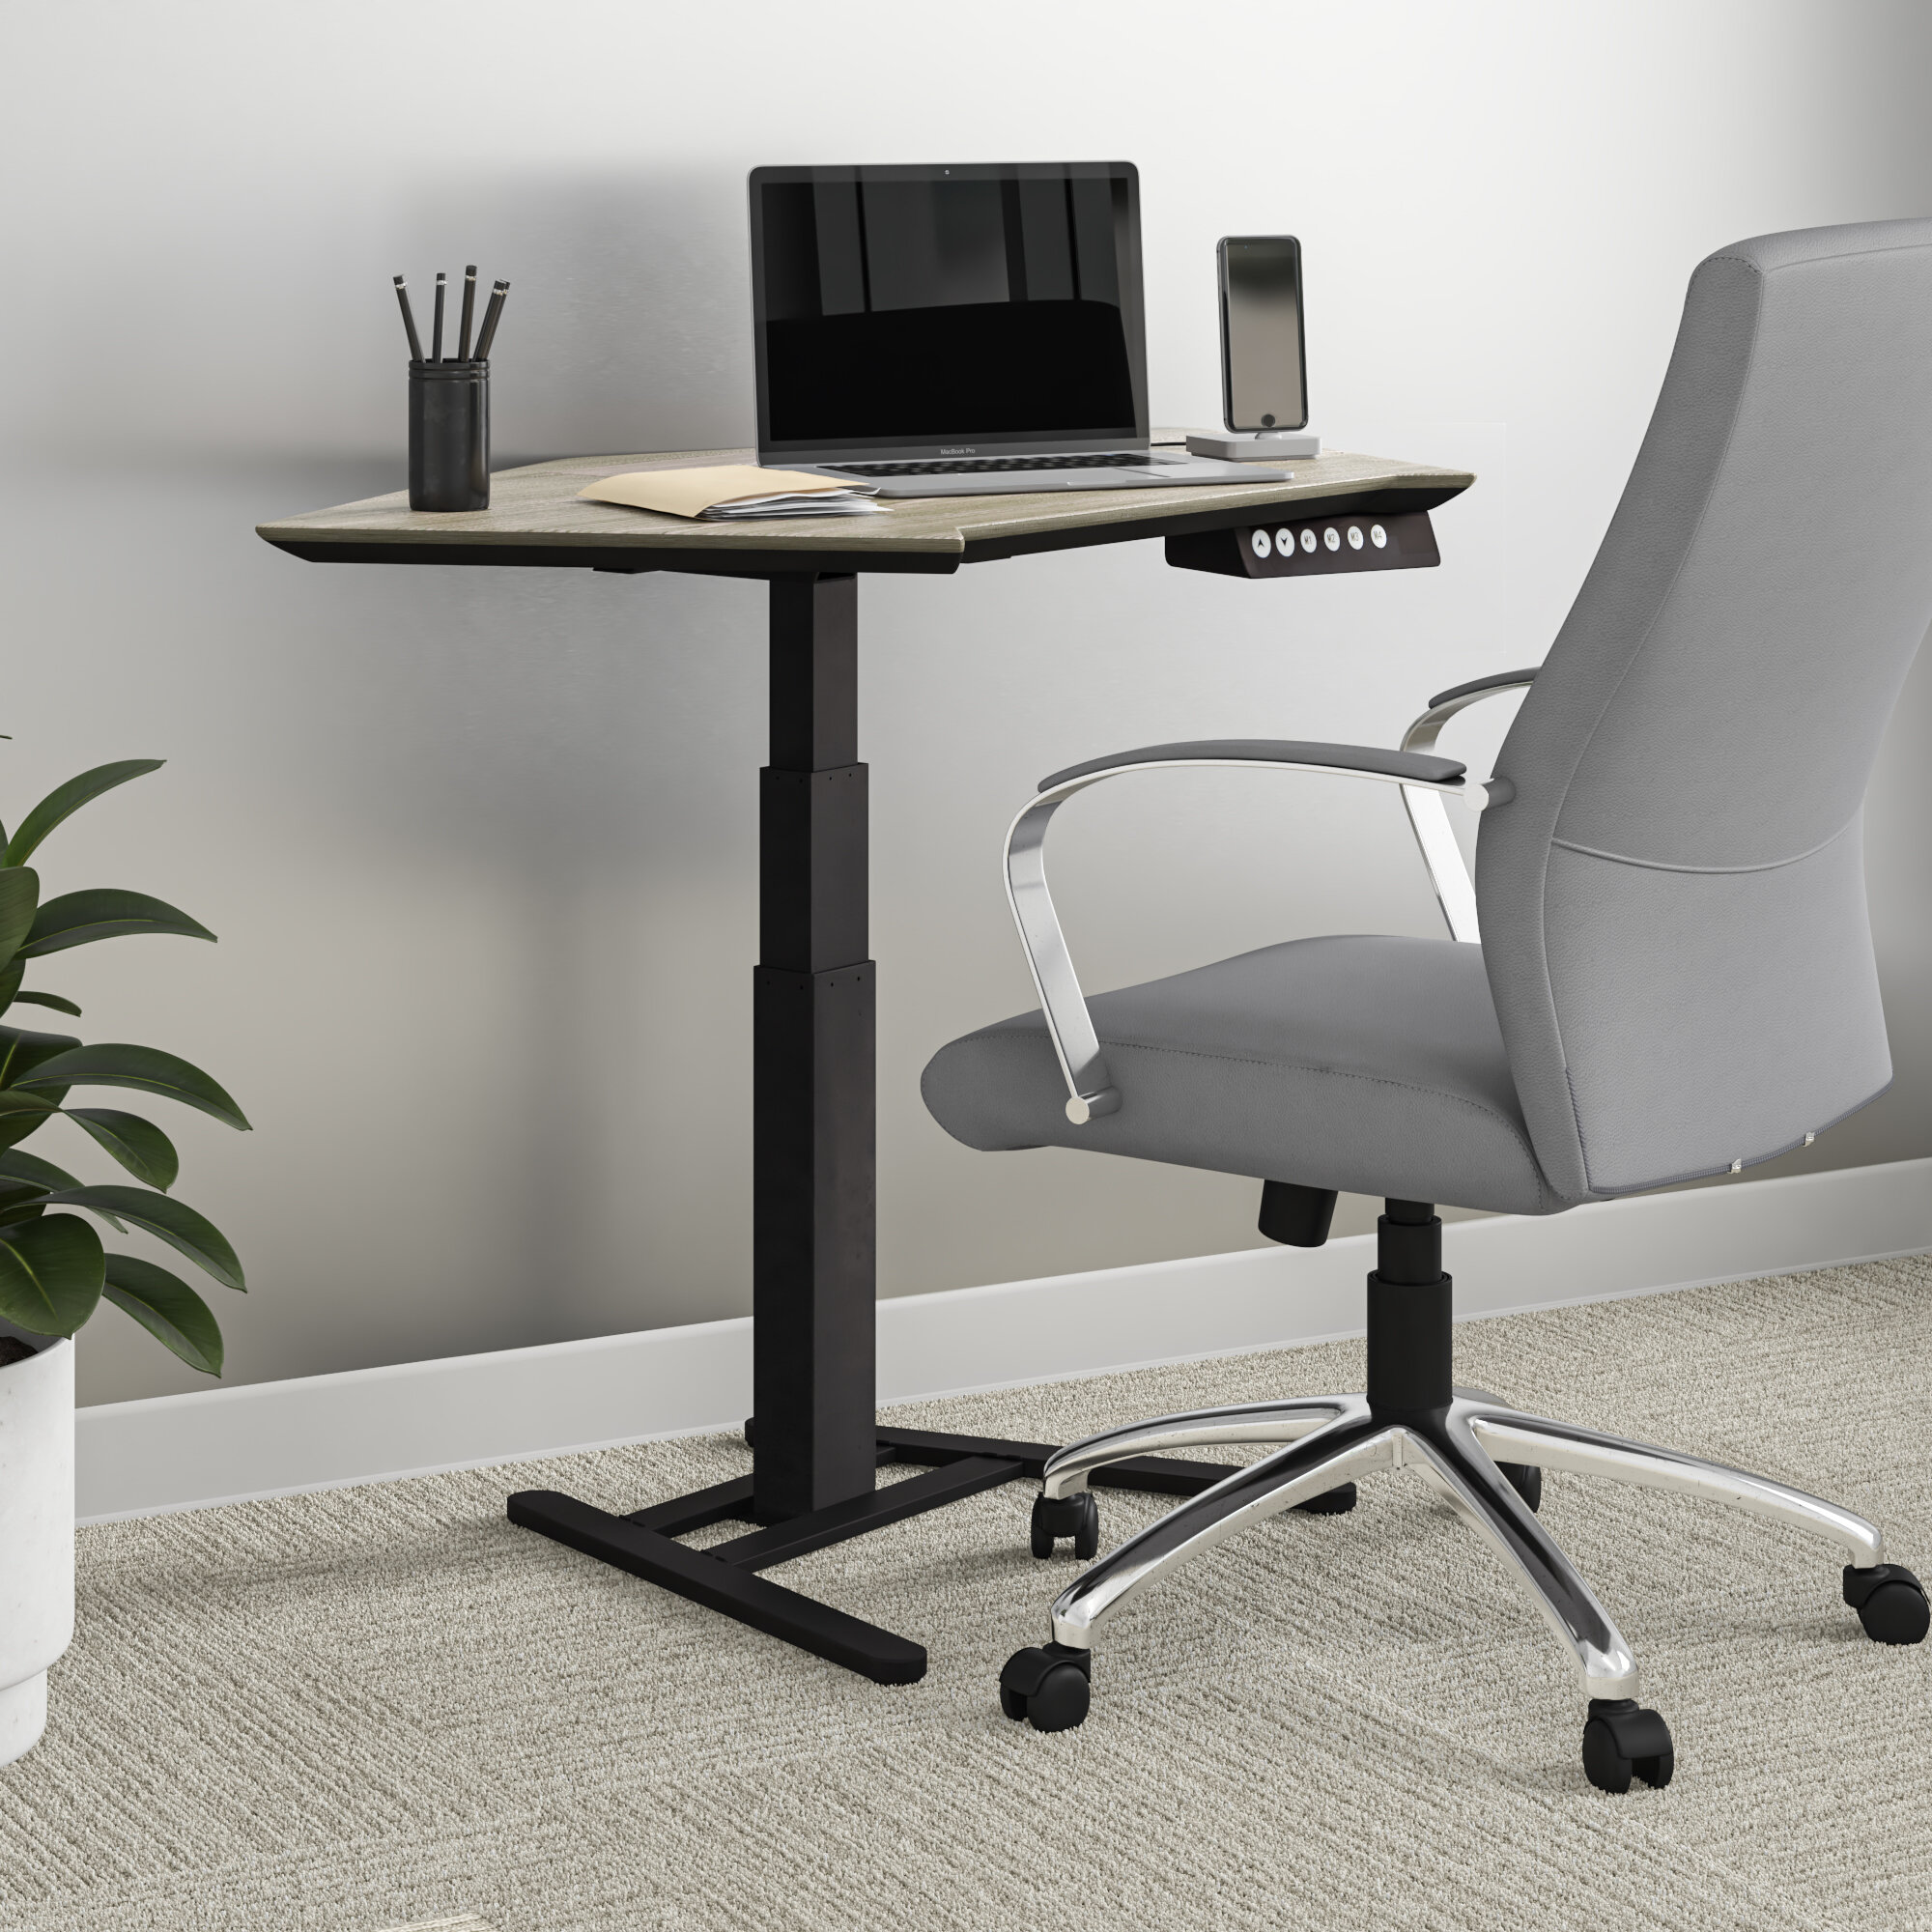 Double Two Person Desks Up To 80 Off This Week Only Wayfair